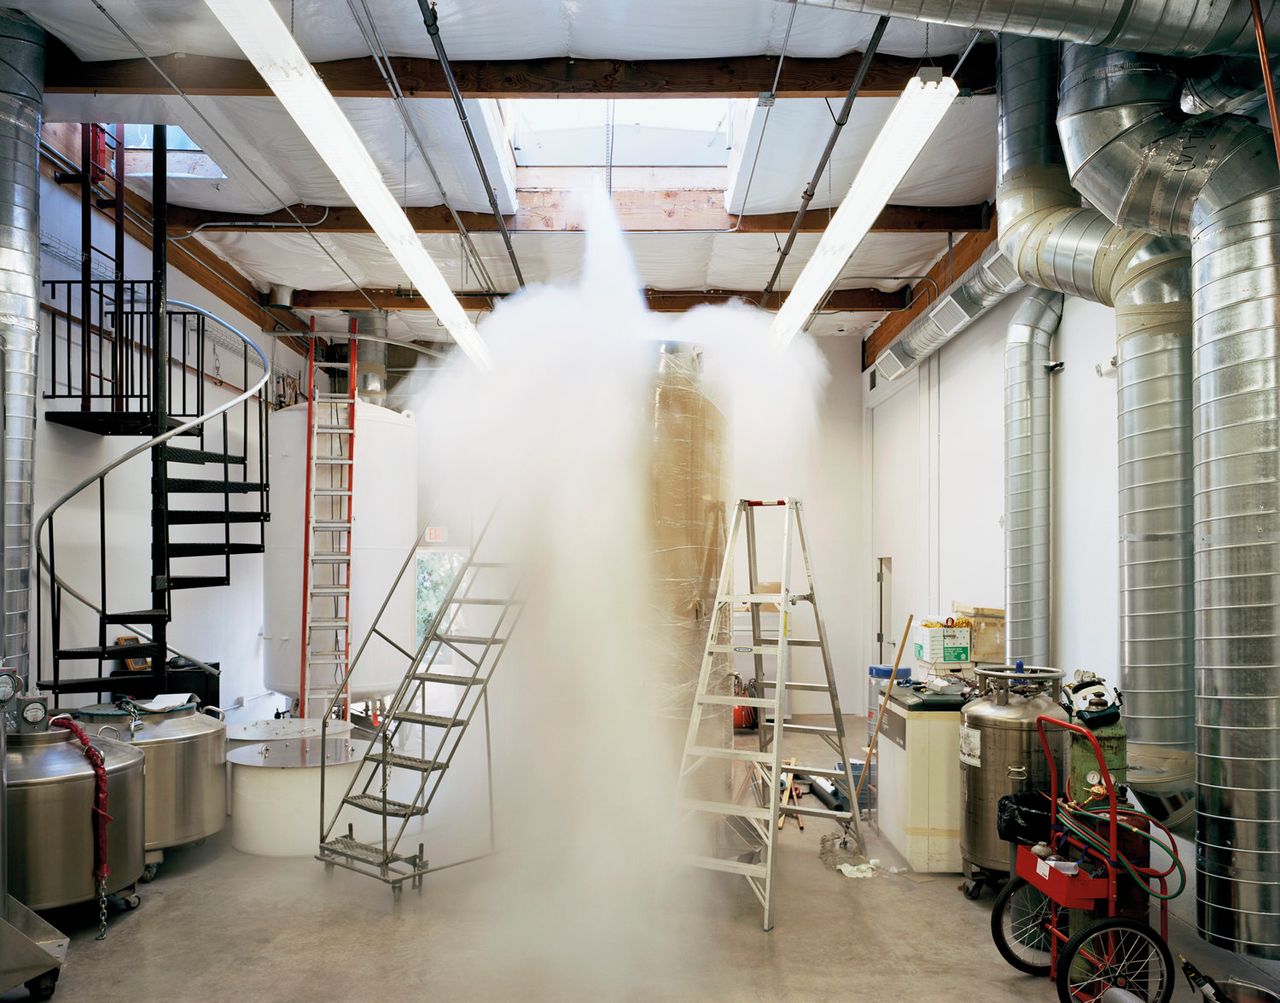 Patient Care Bay (Bigfoot dewar being filled with liquid nitrogen), Alcor Life Extension Foundation, Scottsdale, Arizona. October 2006. From The Prospect of Immortality by Murray Ballard, published by GOST, April 2016.